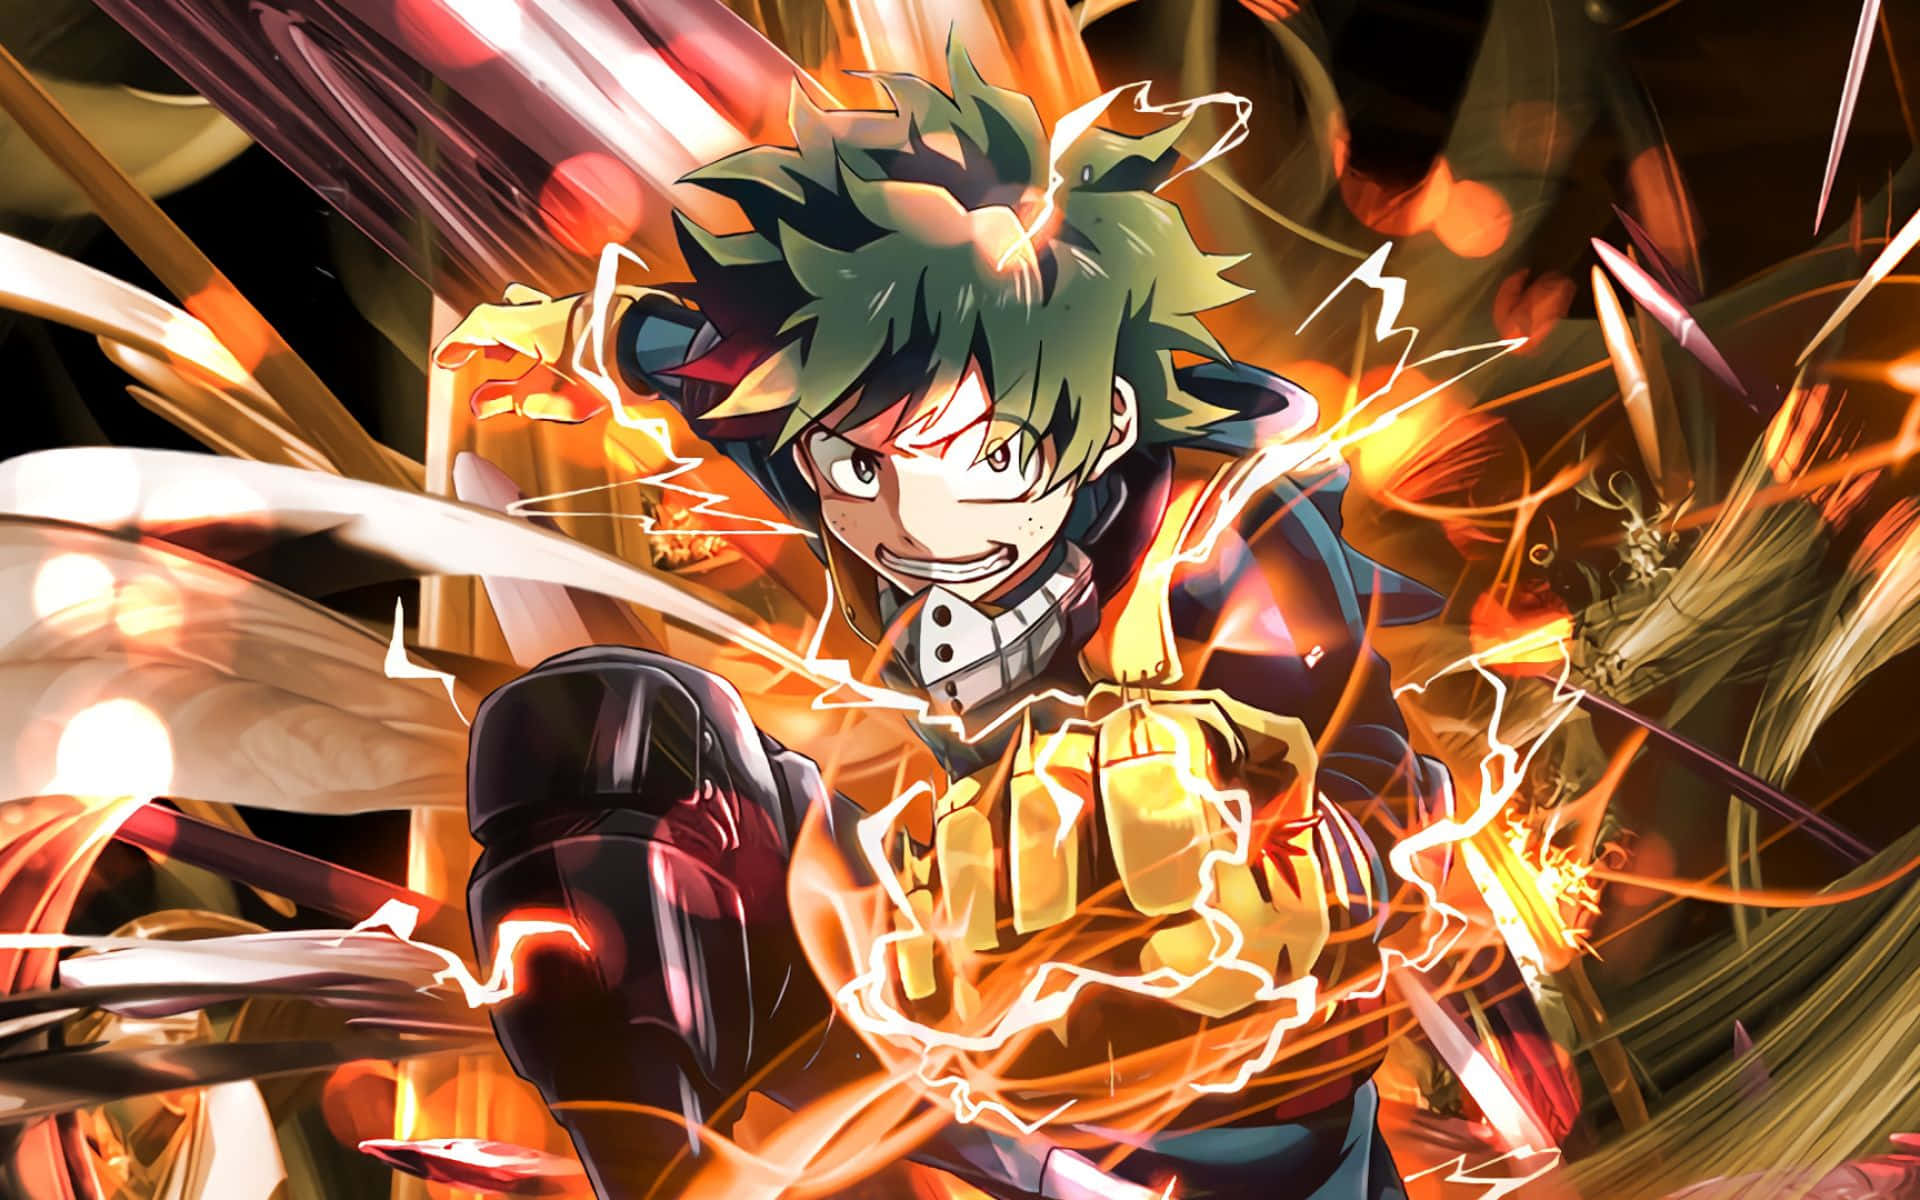 Follow the path of becoming a hero with My Hero Academia